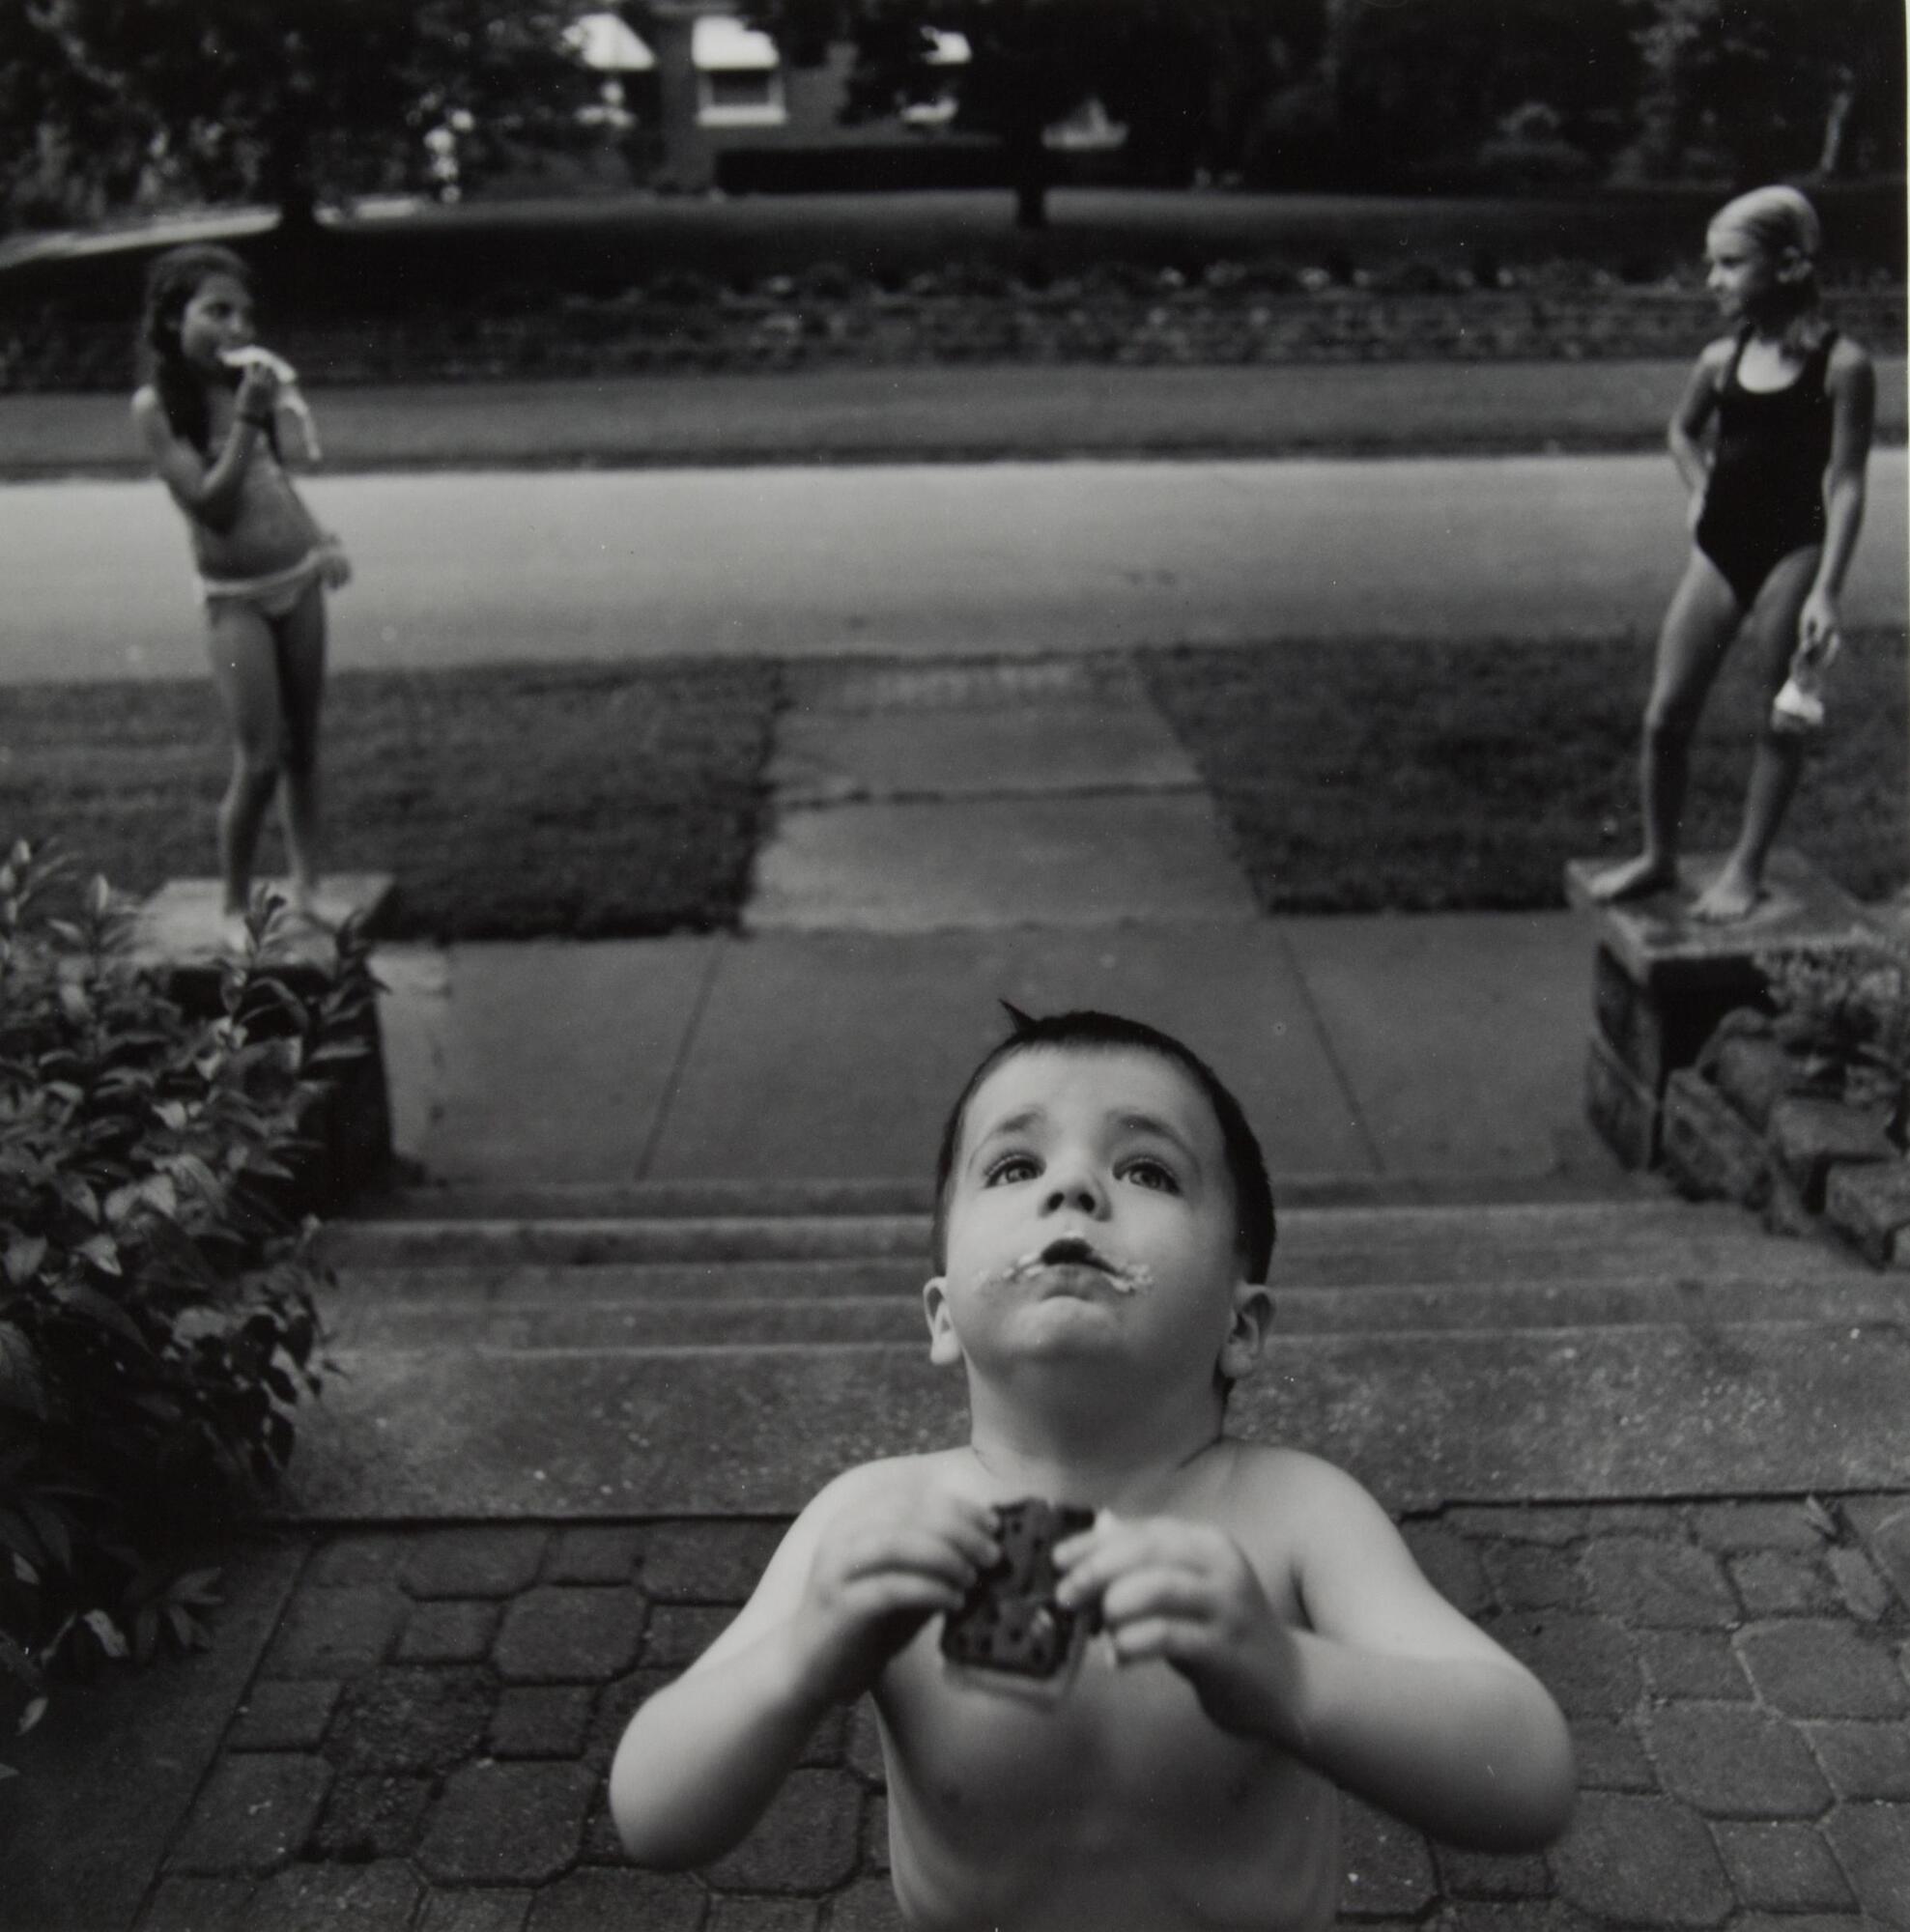 A photograph of three children in front of a house. Taken from inside, looking out; a young boy eats an ice cream sandwich in the foreground. Two young girls stand on square columns at the end of the steps leading to the house, framing the boy and mirroring one another's pose.